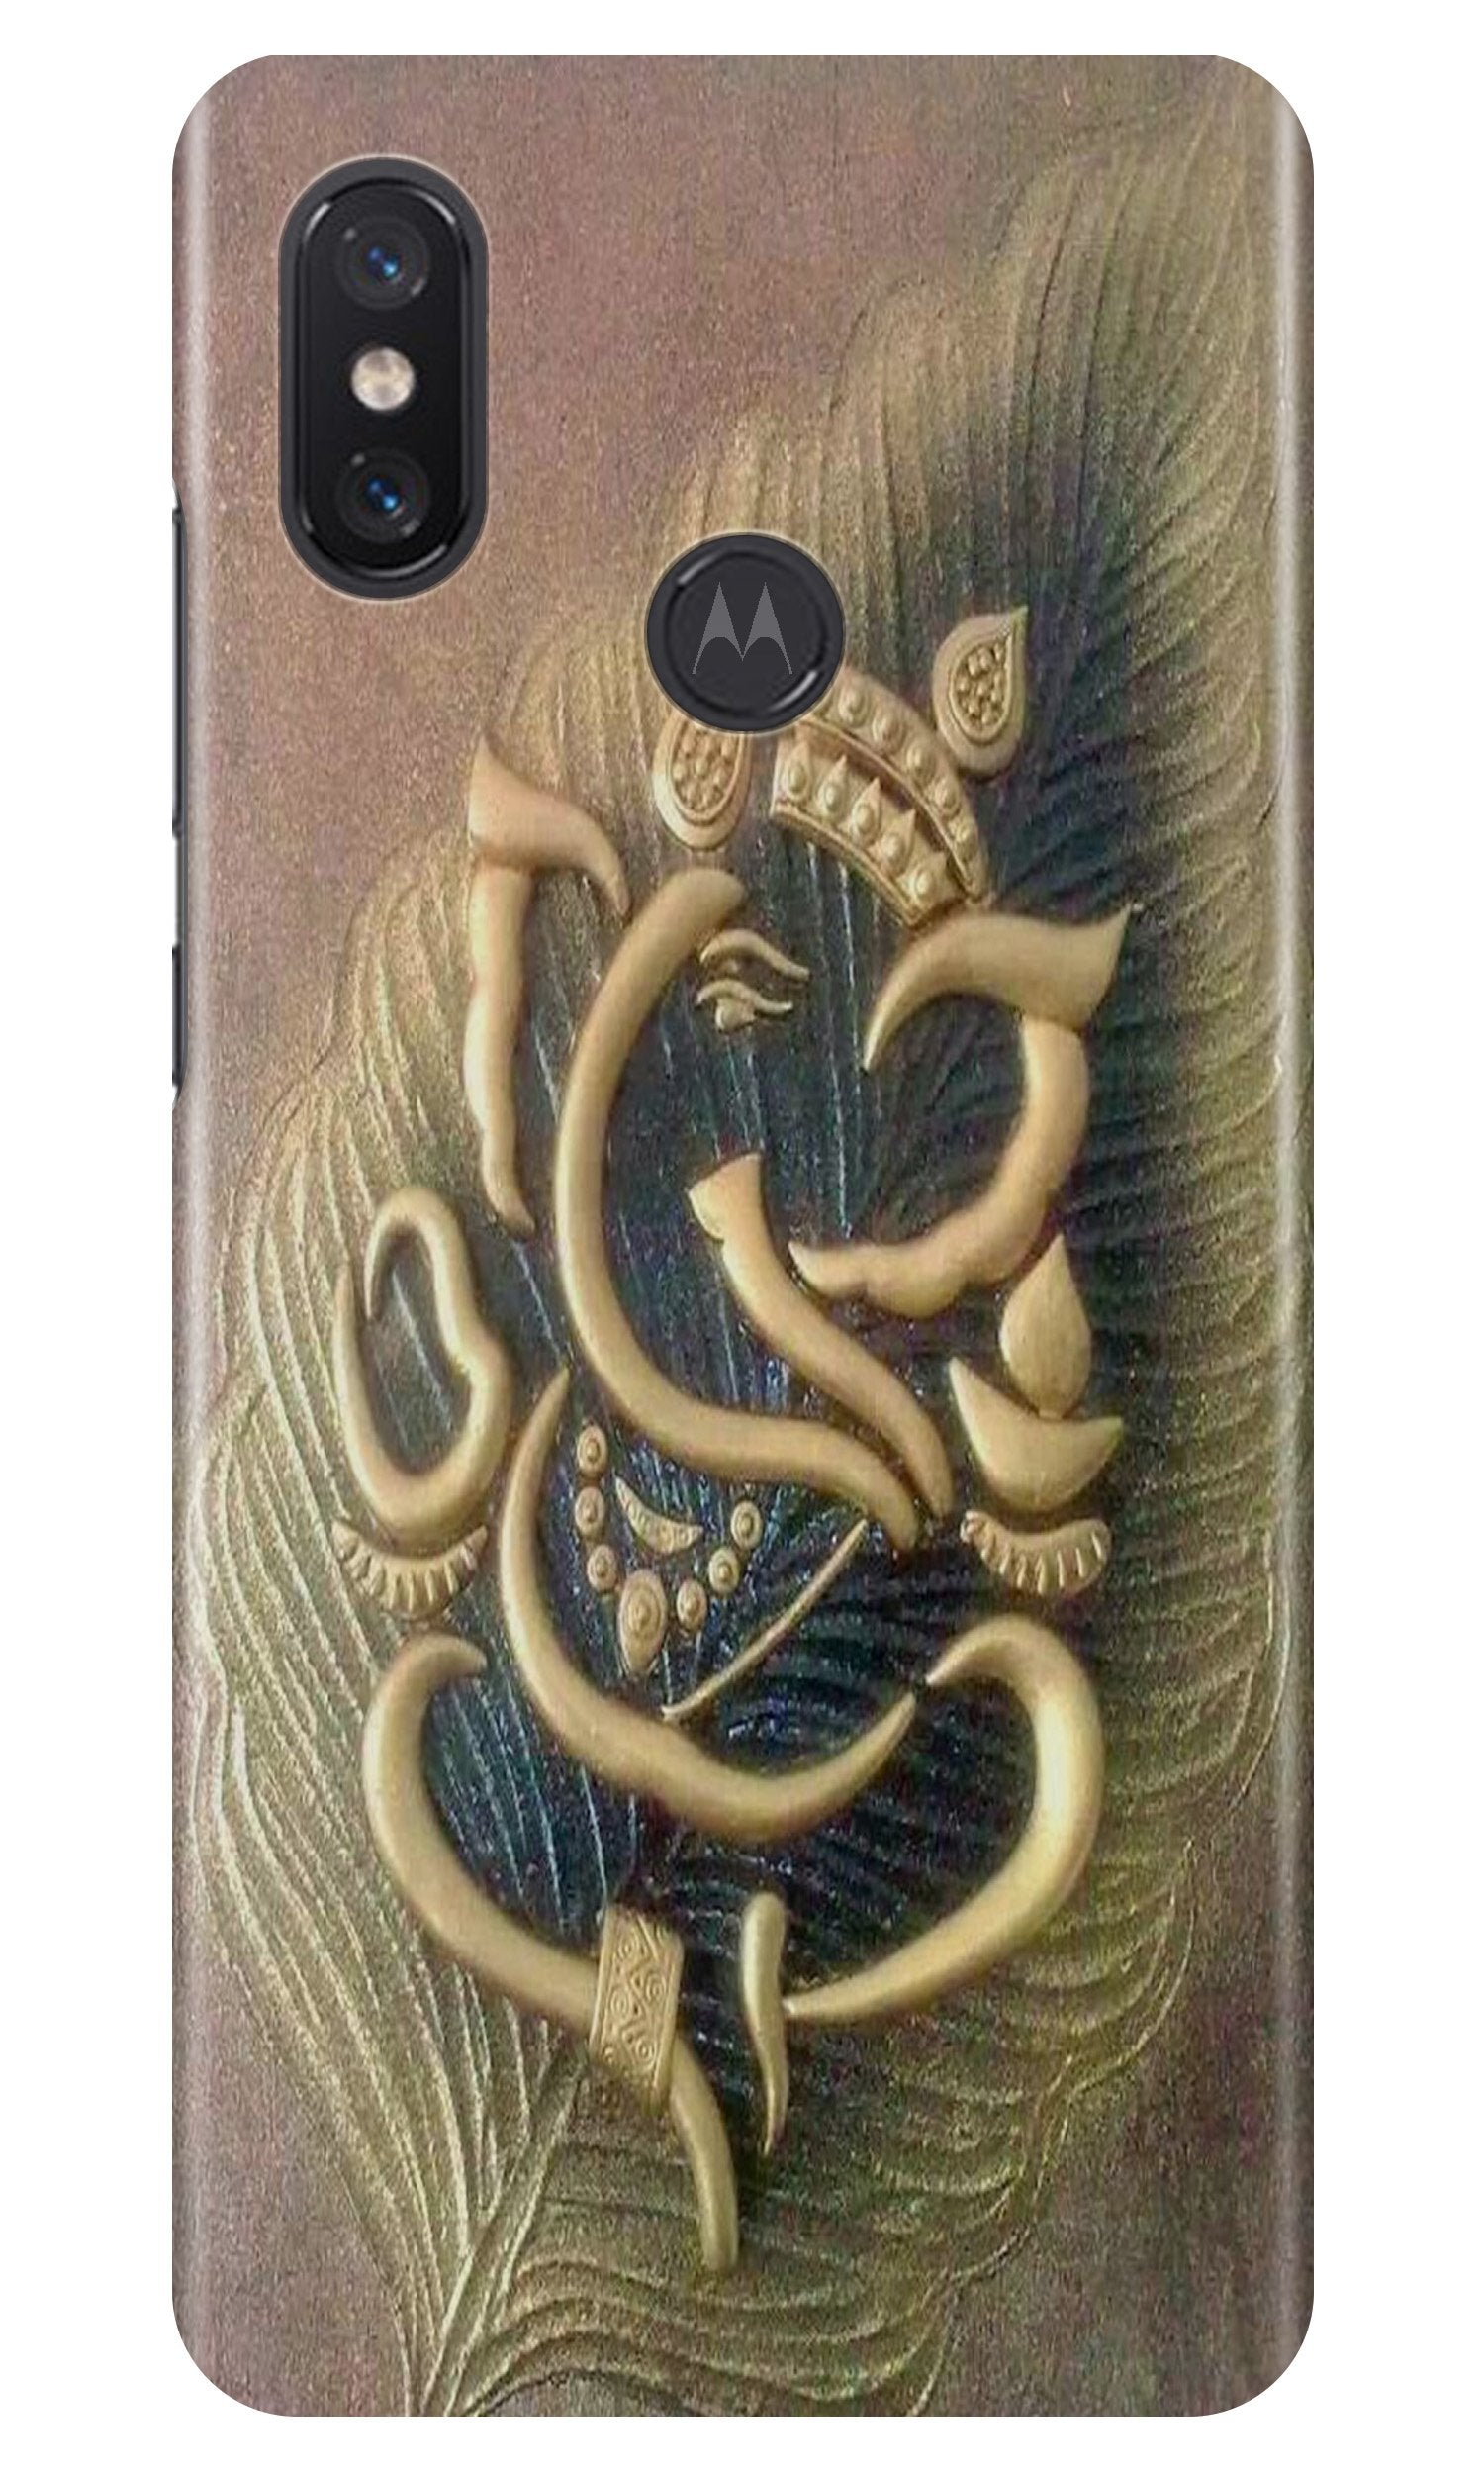 Lord Ganesha Case for Moto One Power